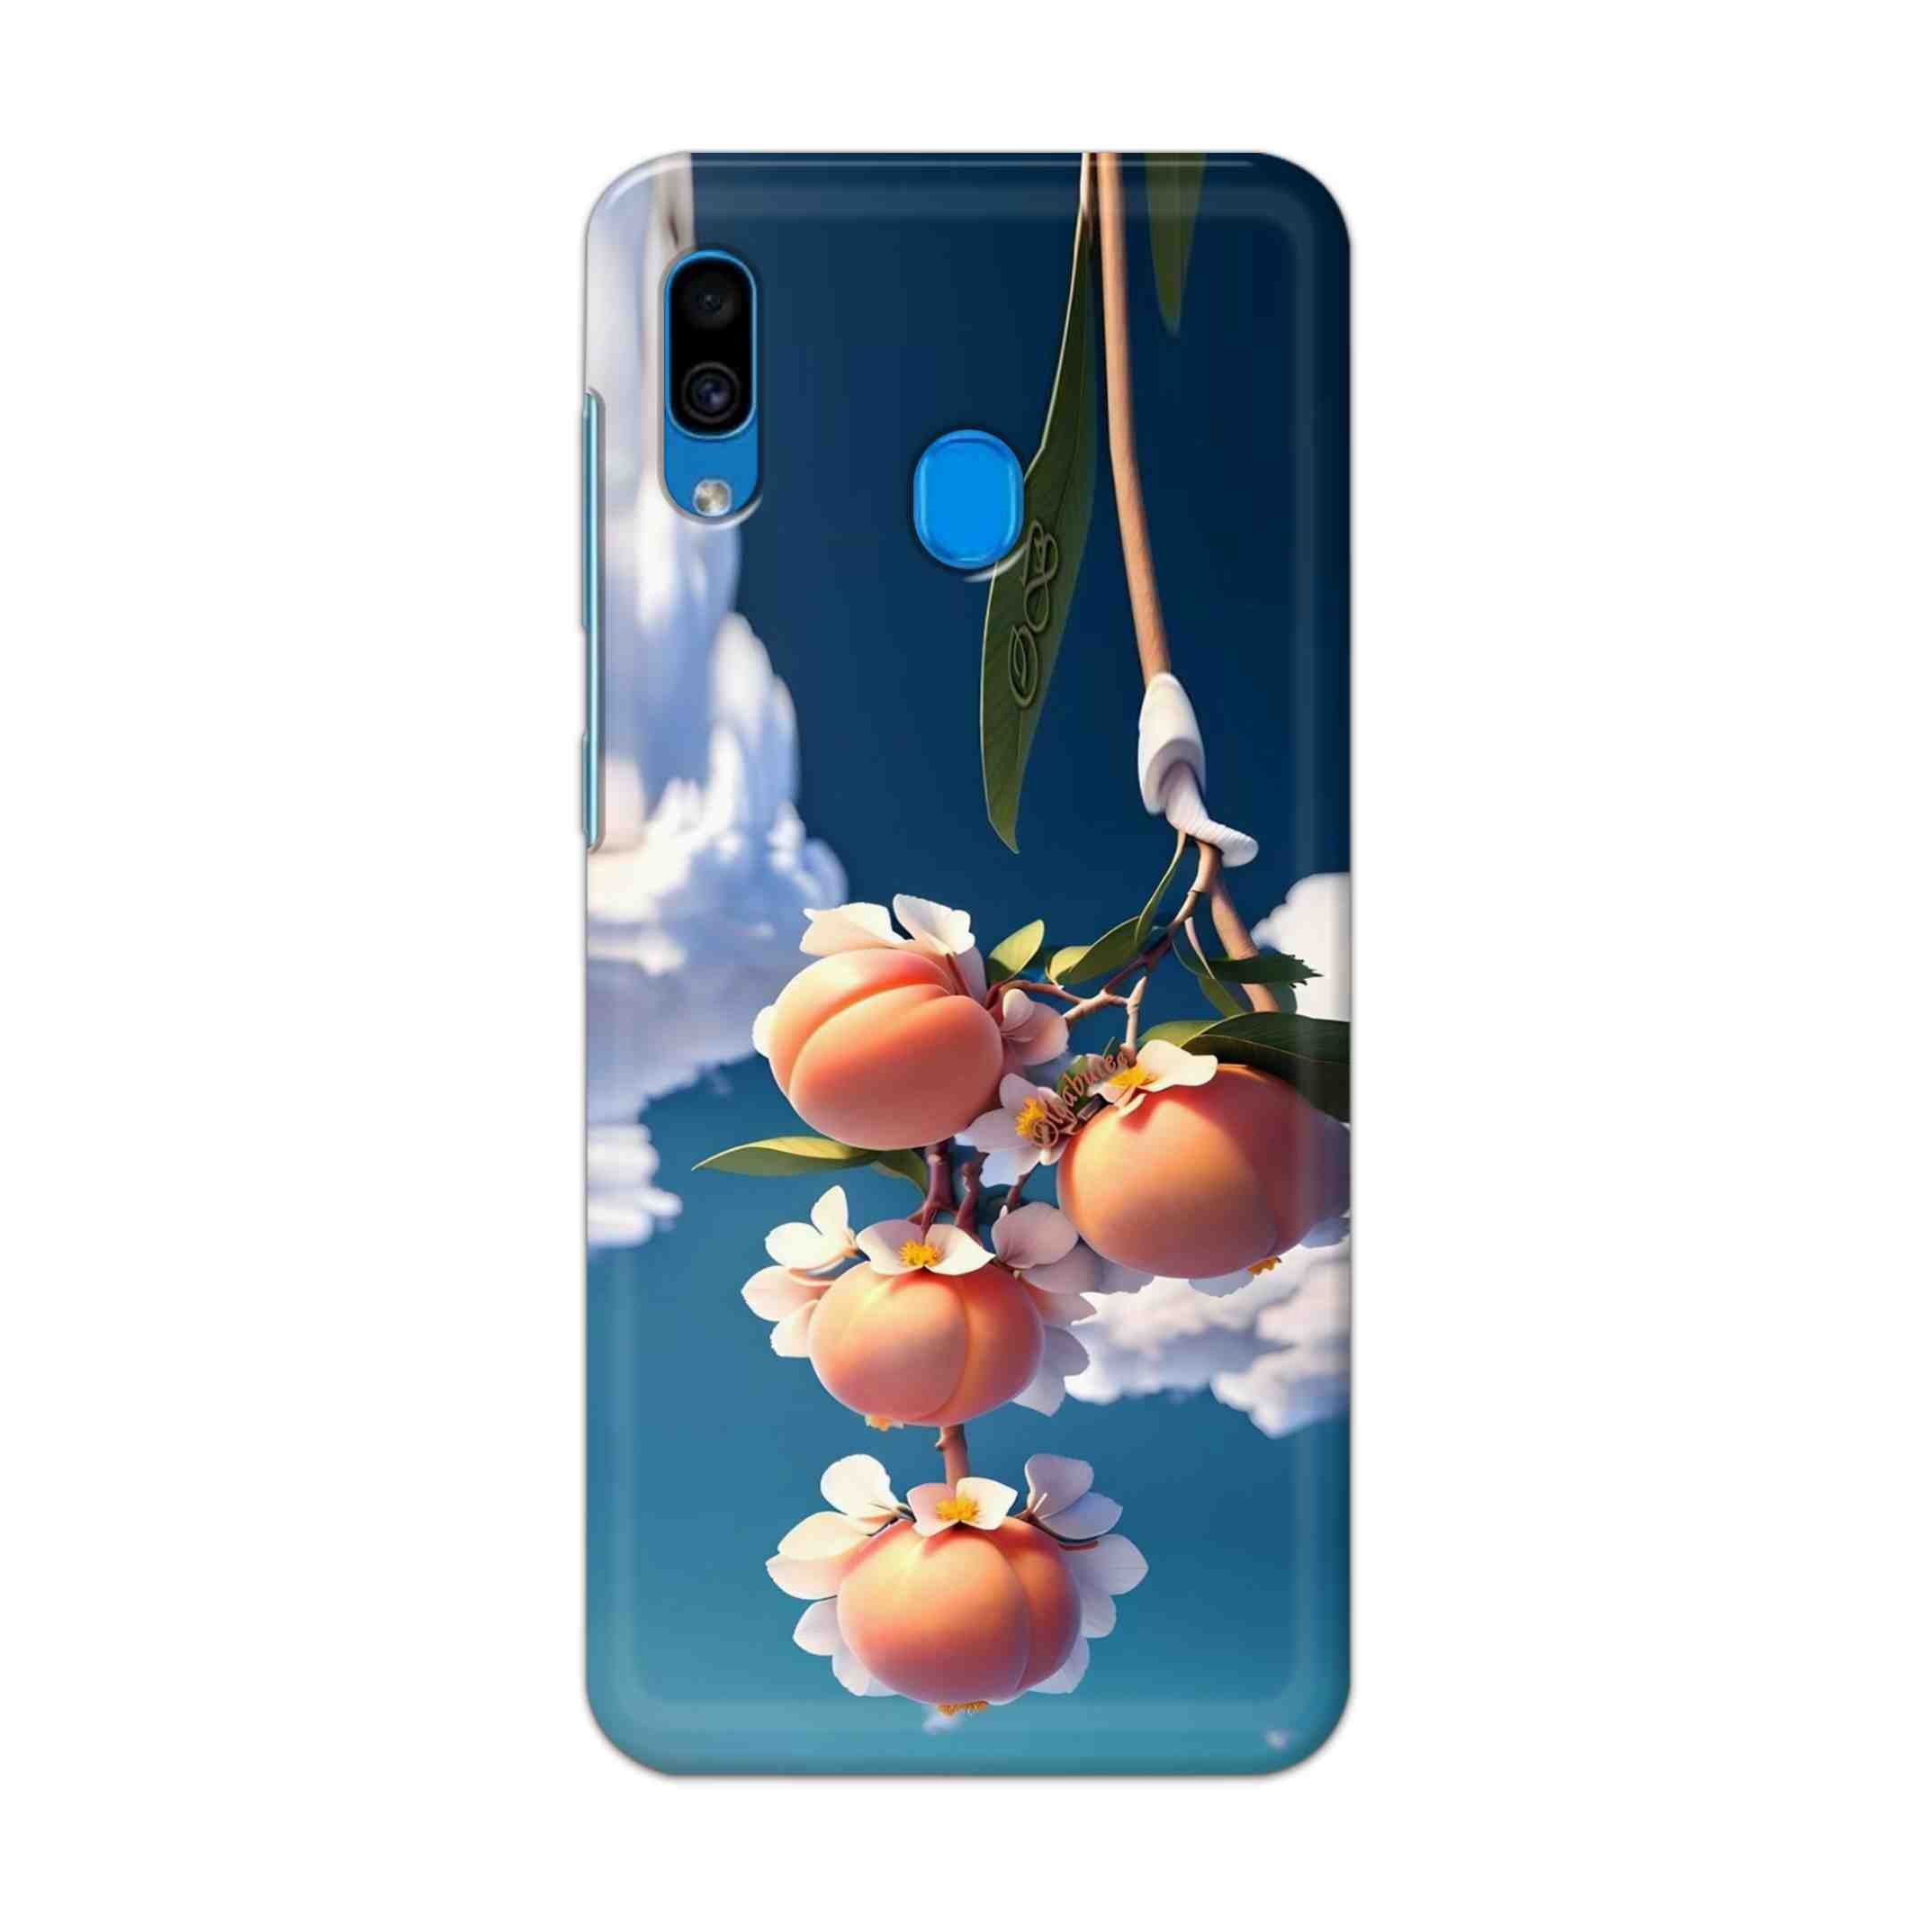 Buy Fruit Hard Back Mobile Phone Case Cover For Samsung Galaxy A30 Online